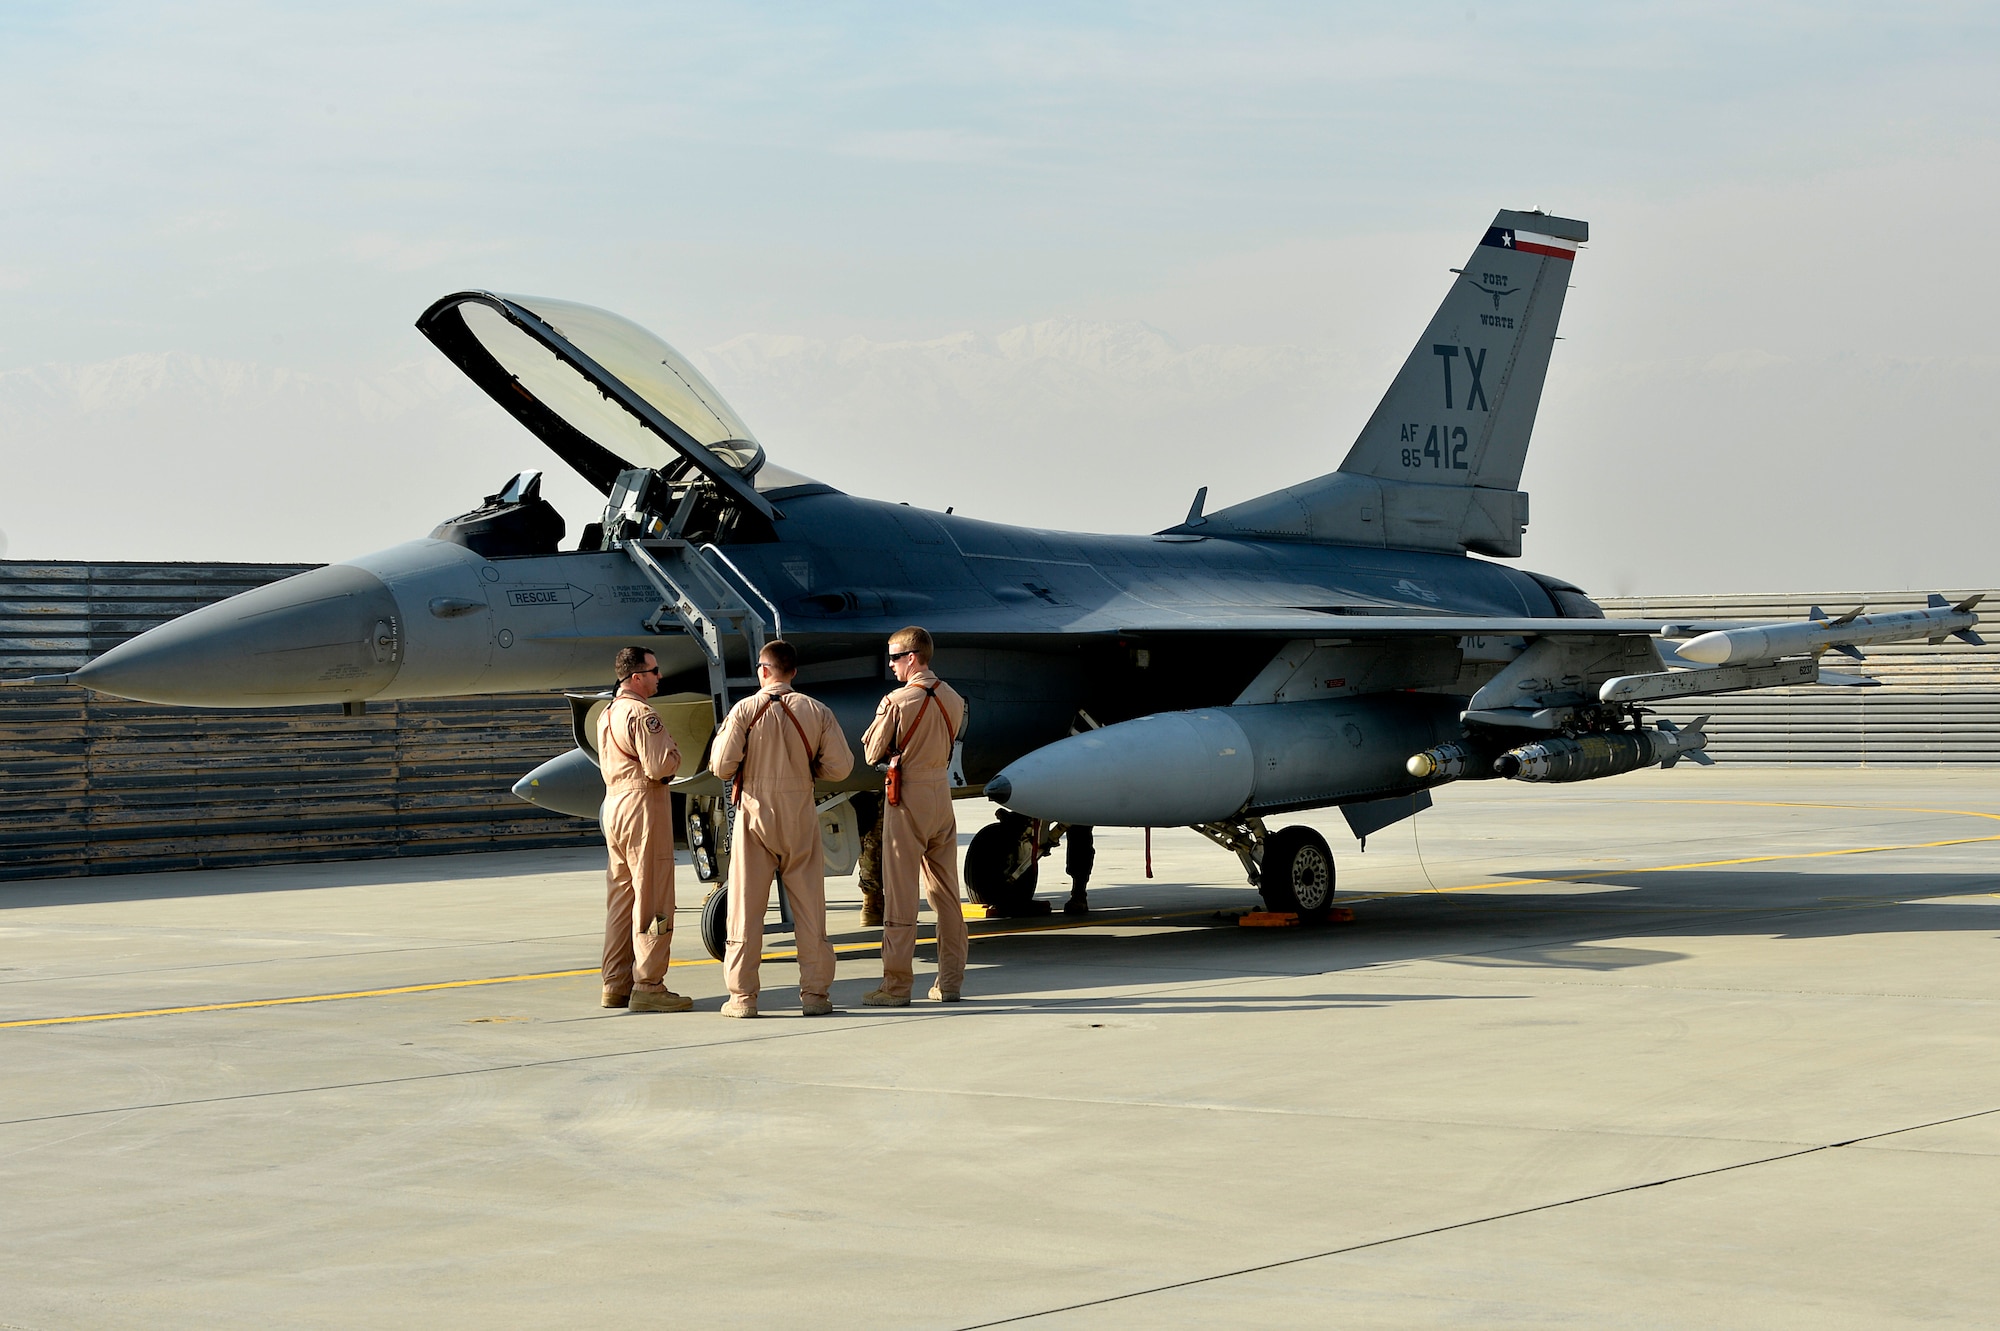 The first of several F-16 Fighting Falcons sits on the flightline at Bagram Airfield, Afghanistan, Dec. 15, 2013. The F-16s transitioned from Kandahar Airfield, Afghanistan, to Bagram once the main runway was renovated. (U.S. Air Force photo by Senior Airman Kayla Newman/Released)